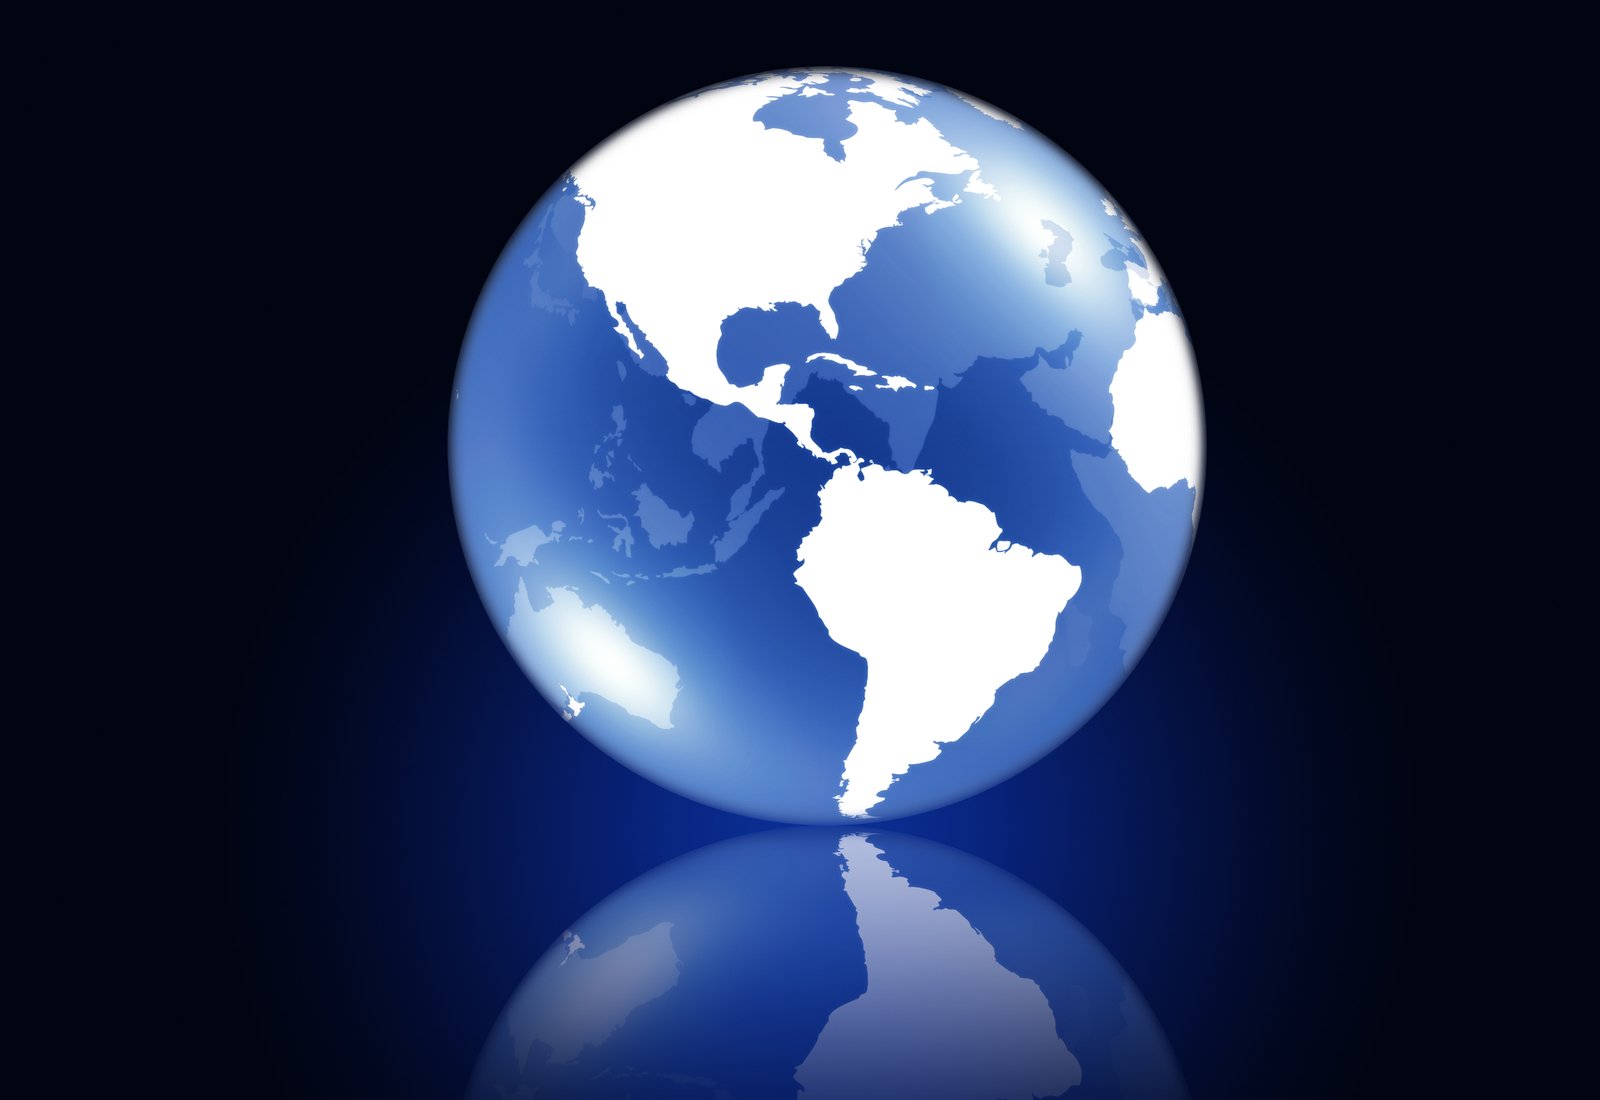 a blue and white globe on a black surface